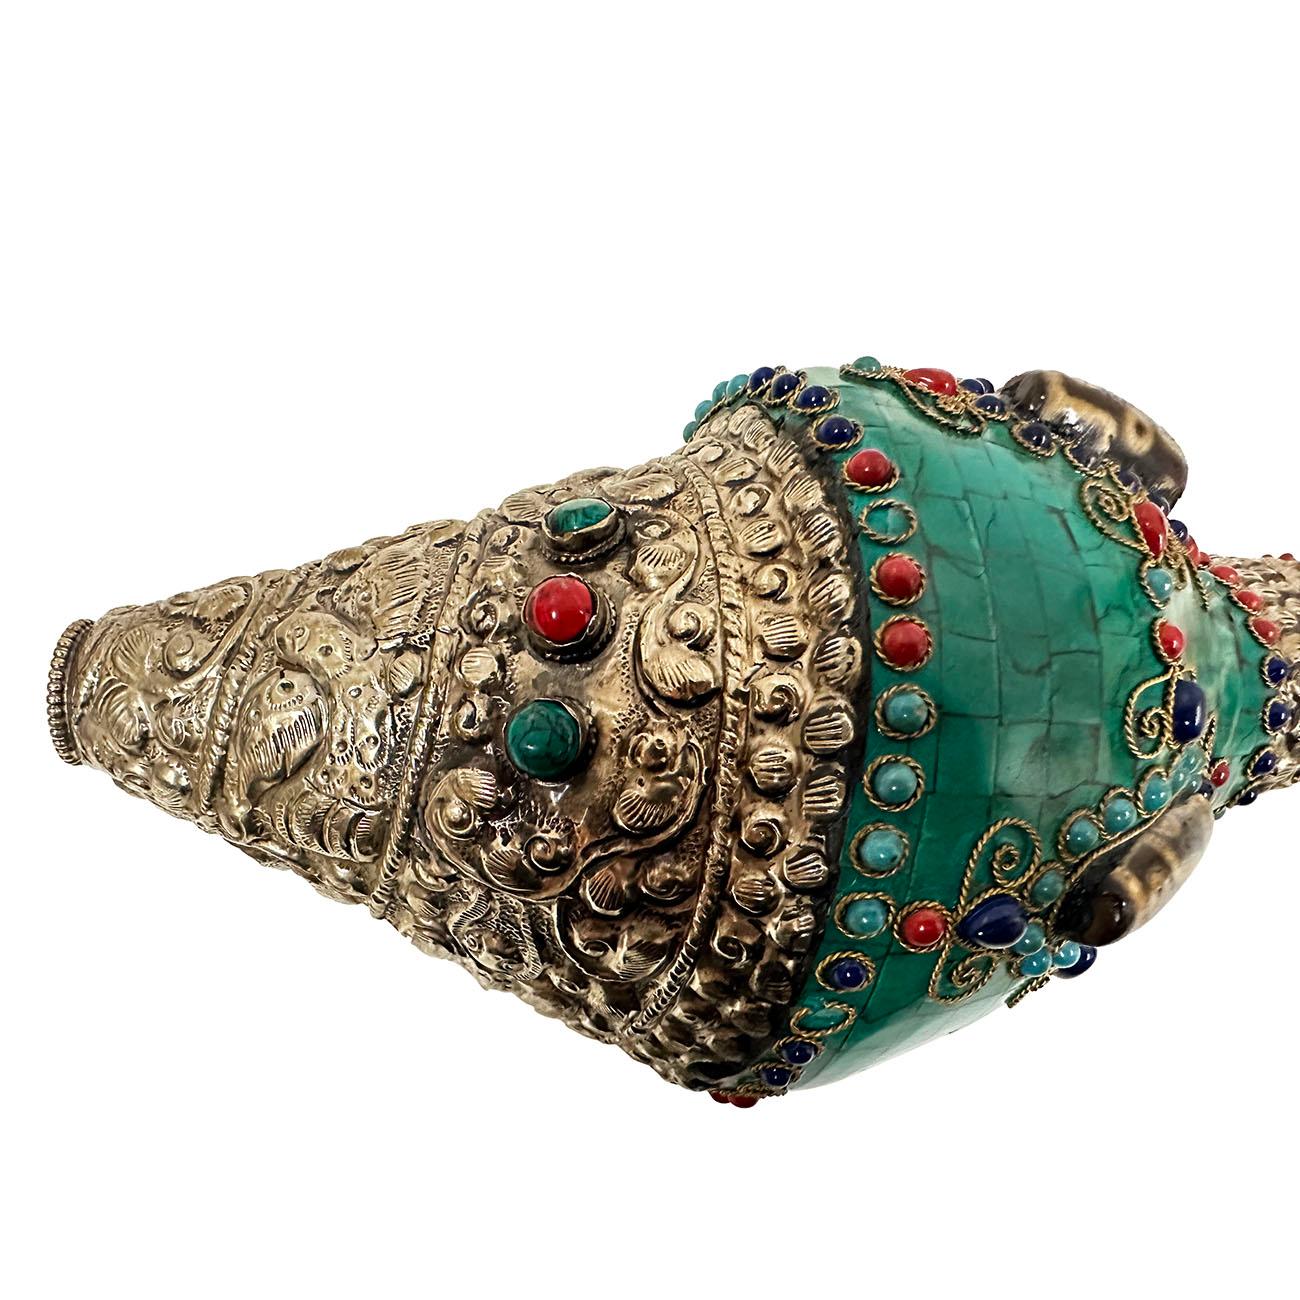 Hand-Crafted  Antique Tibetan Buddhist Conch Shell with Turquoise, Coral and DZI inlay  For Sale